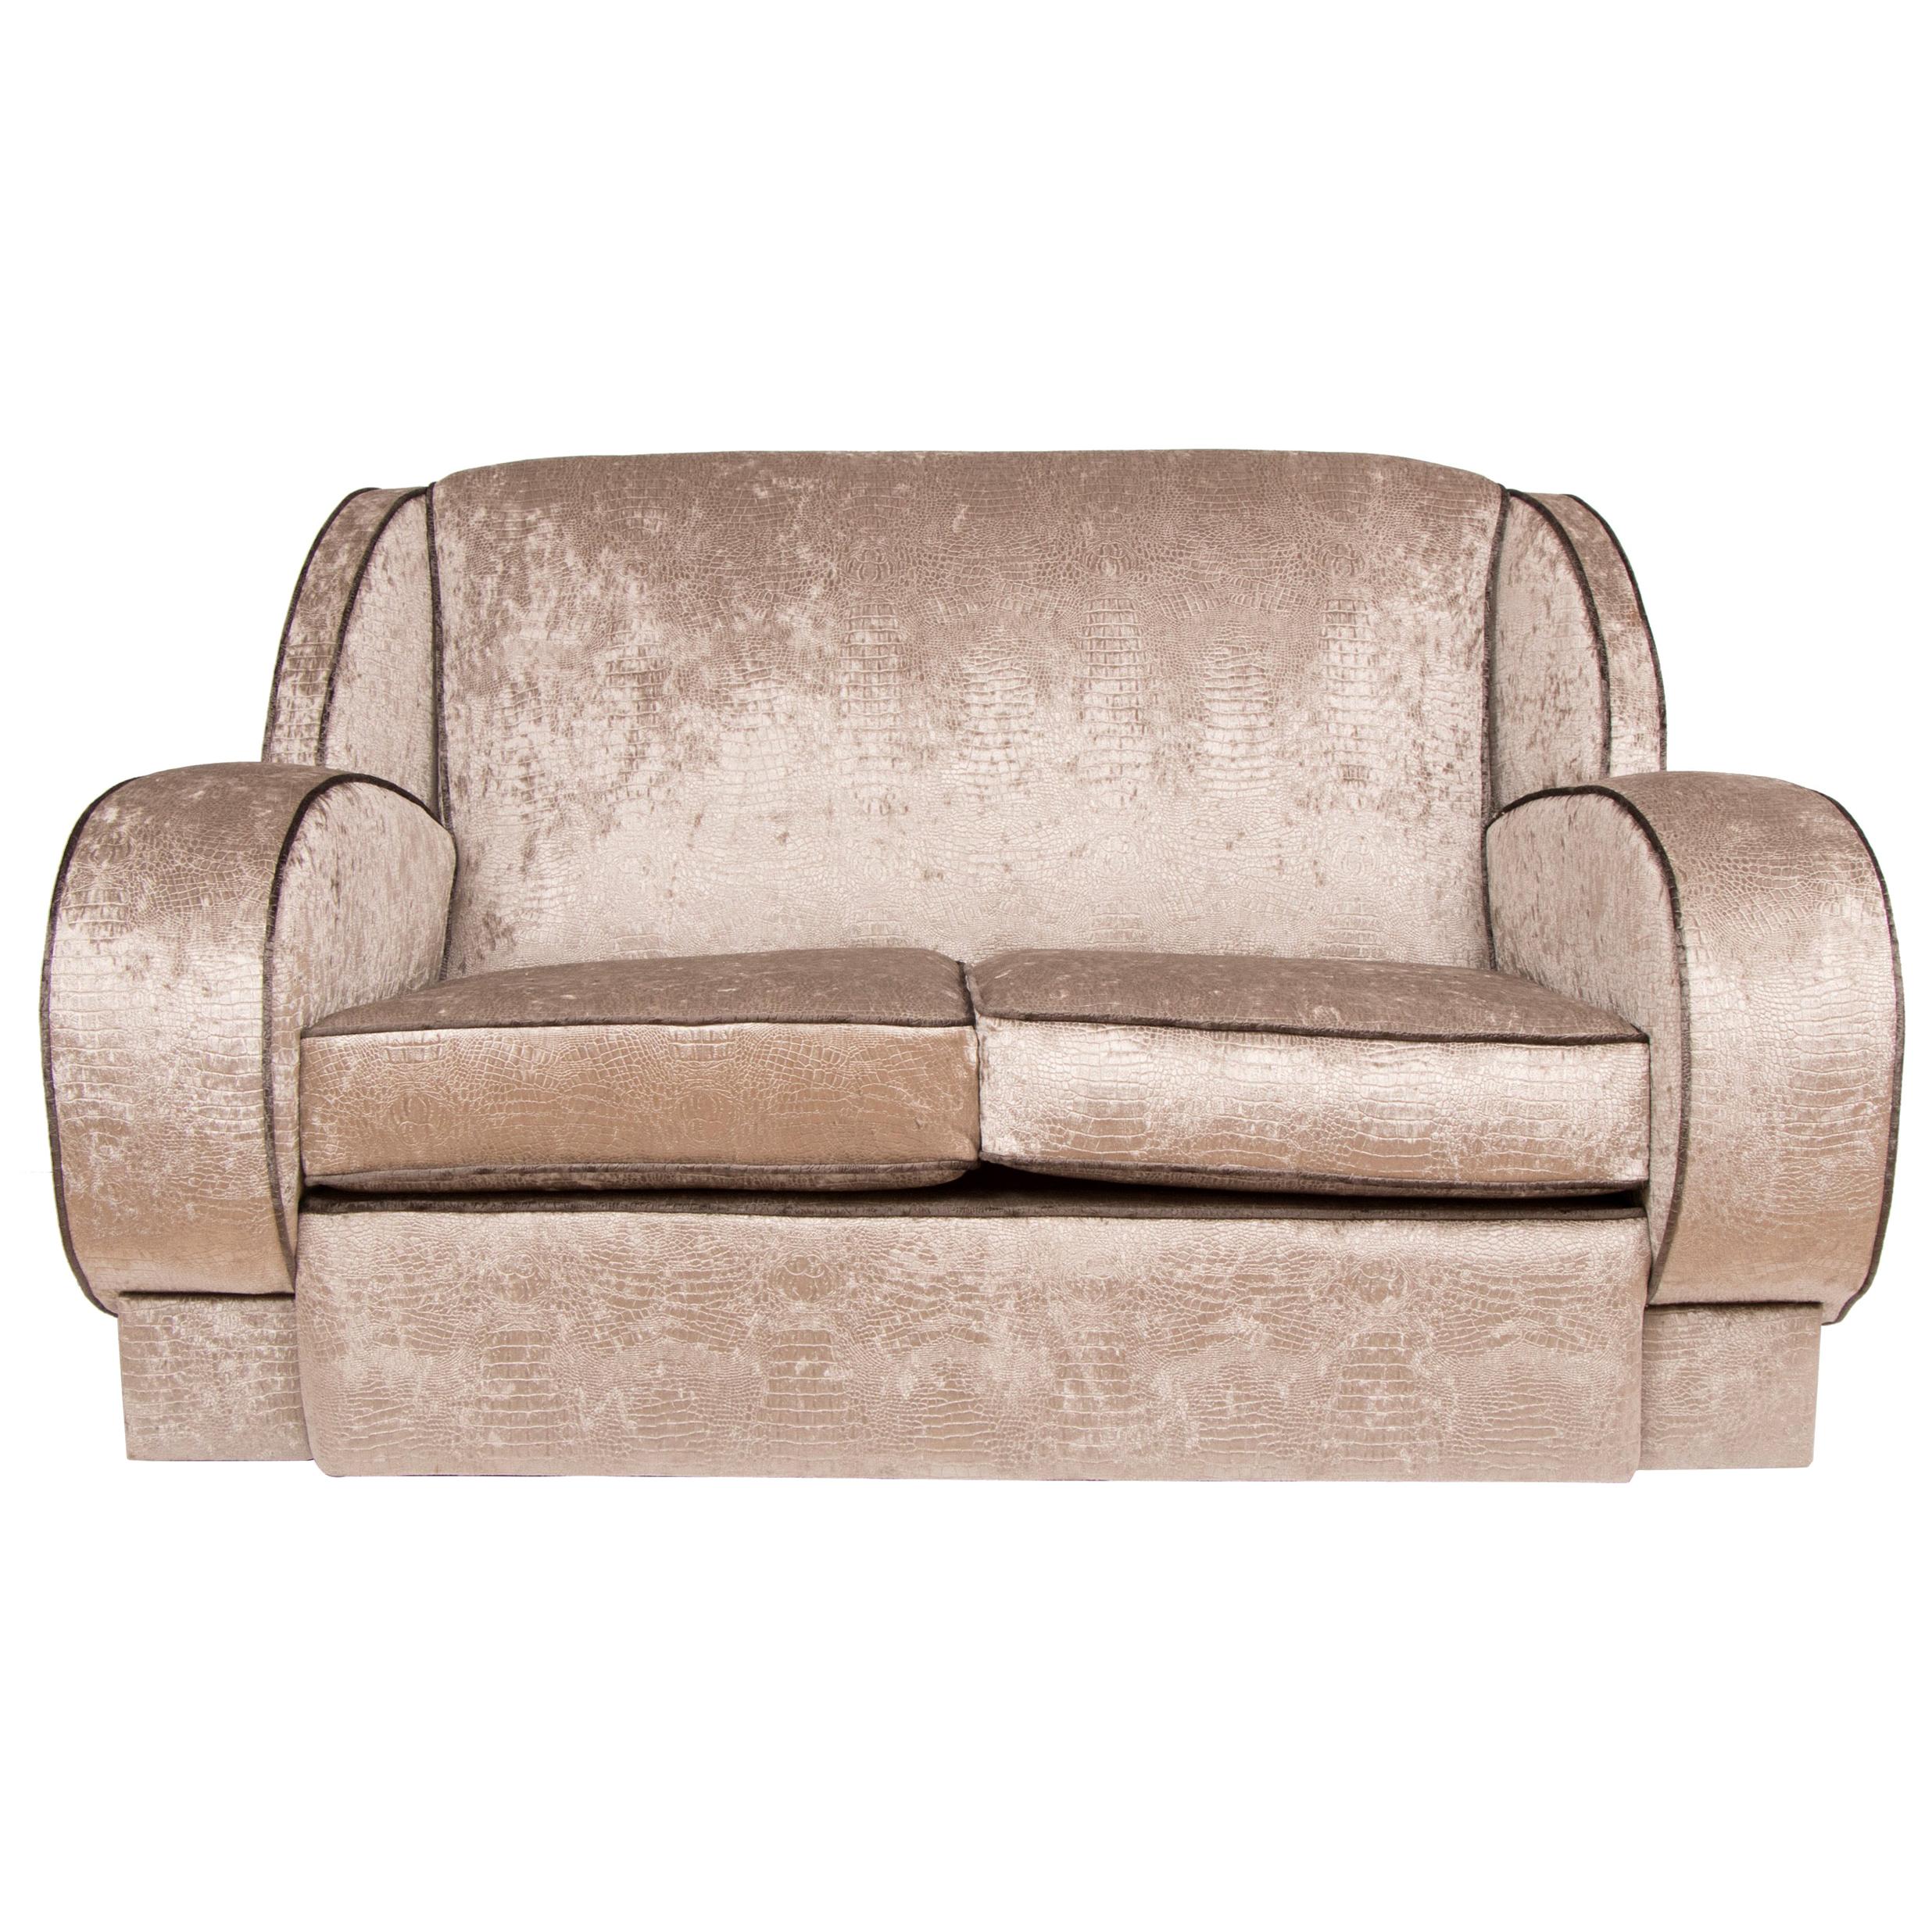 British Art Deco Sofa Newly Upholstered in a Silver Snakeskin Style Fabric For Sale